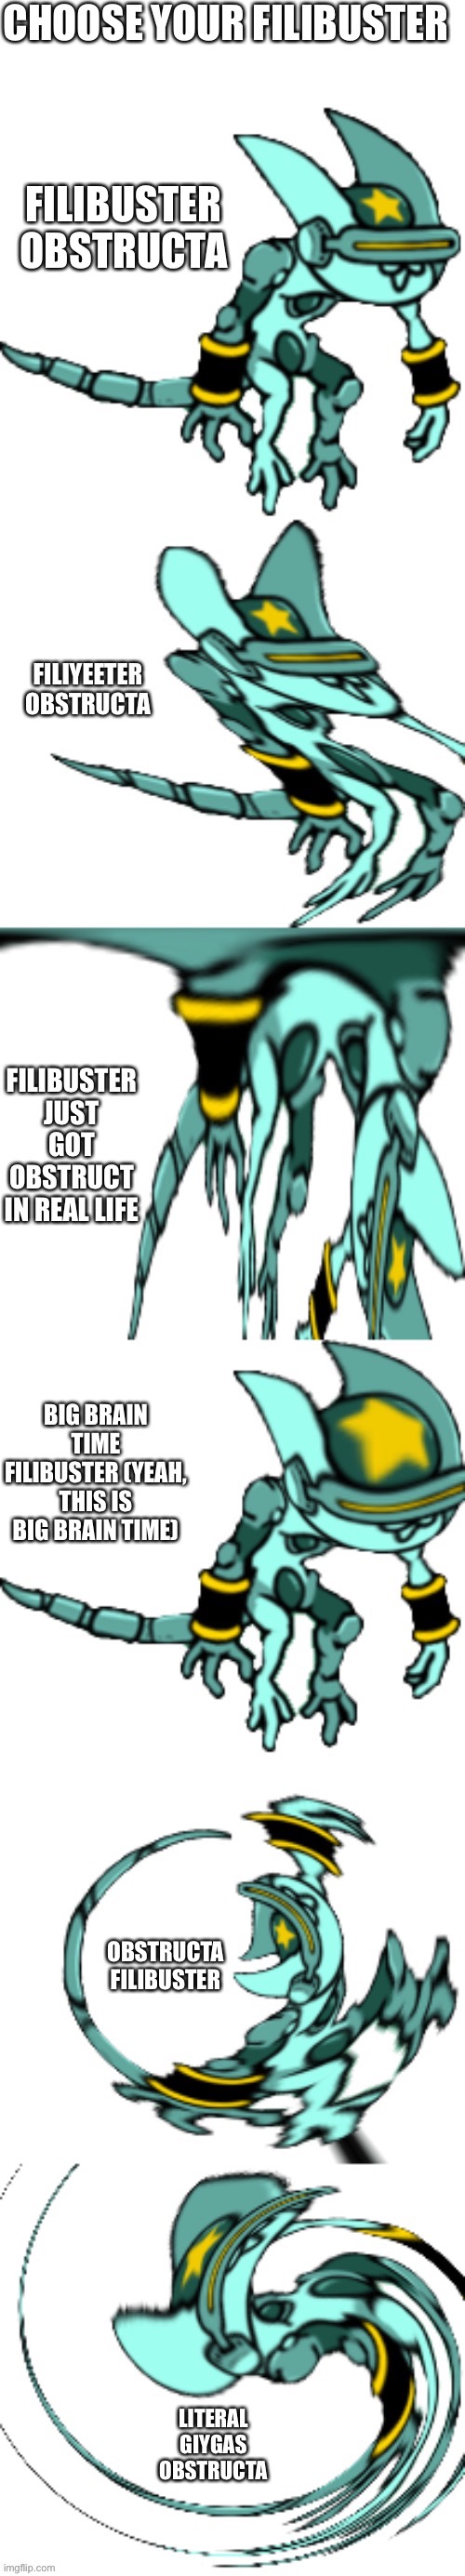 Choose your Filibuster! | image tagged in memes,funny,cats,reference,yeah this is big brain time,cursed image | made w/ Imgflip meme maker